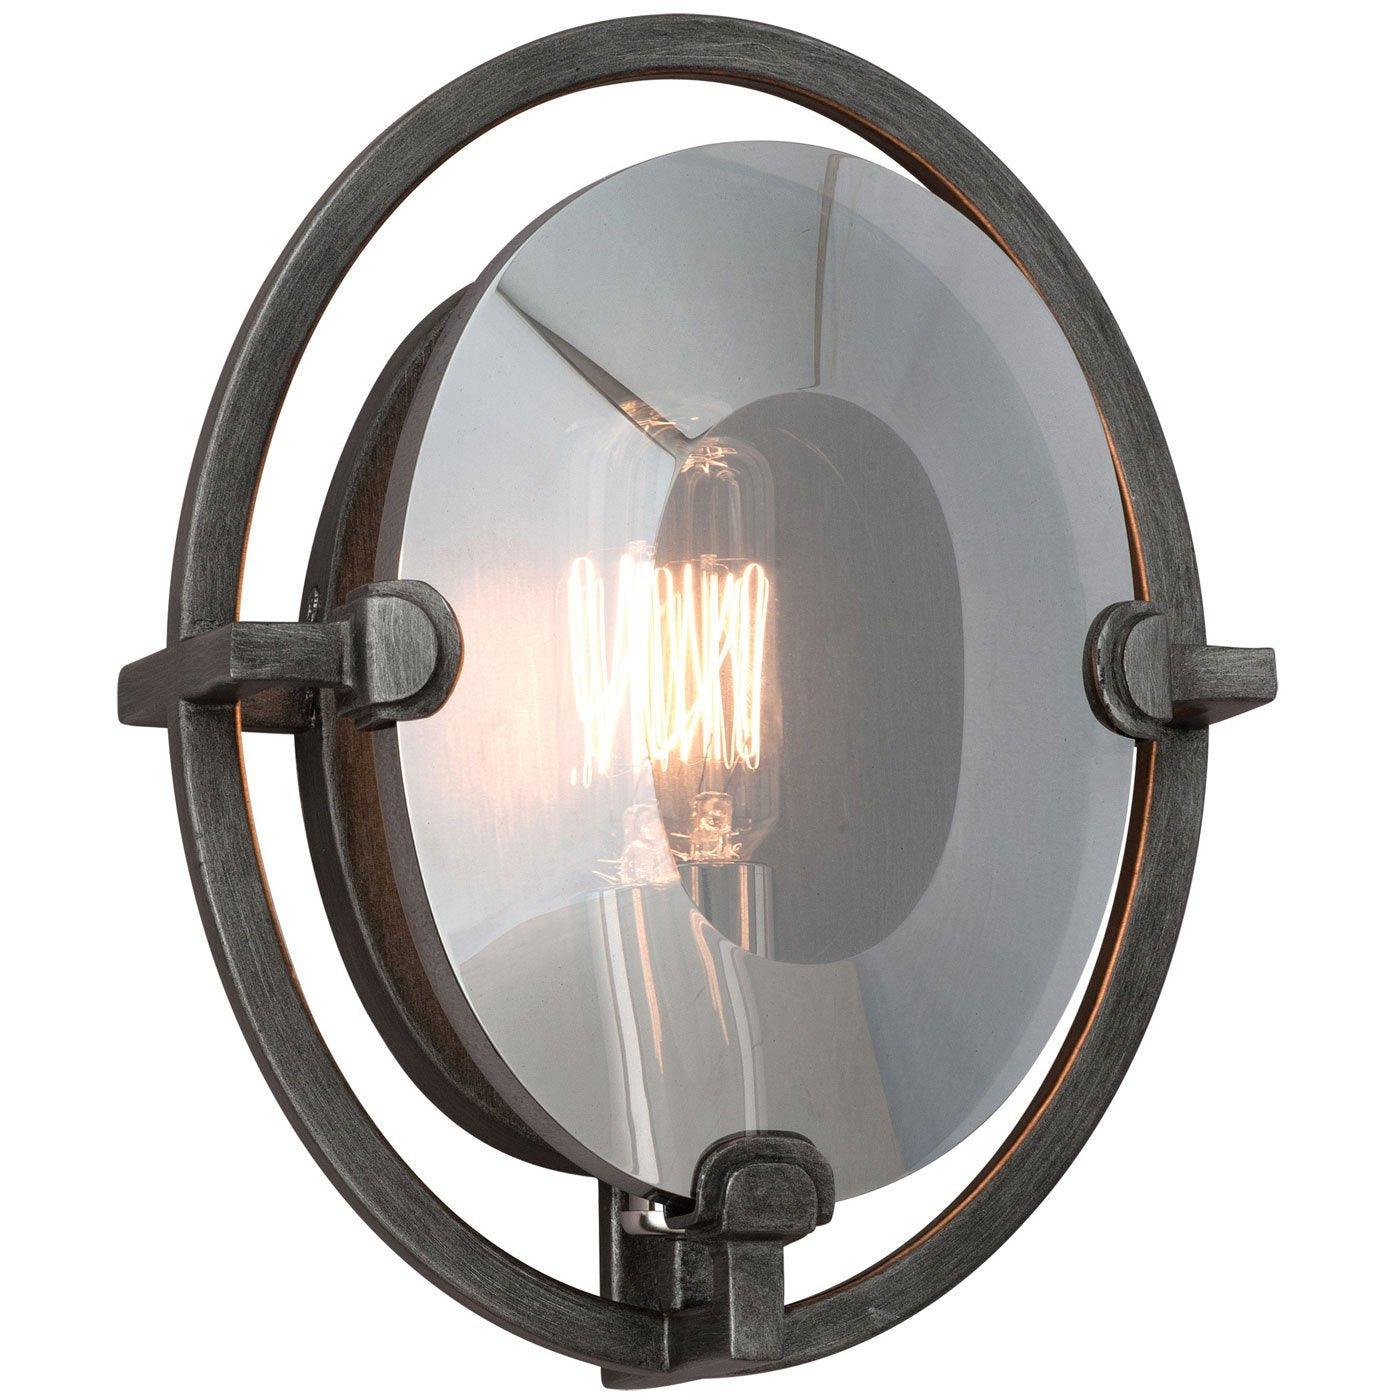 Troy Lighting - Prism Round Wall Sconce - B2821 | Montreal Lighting & Hardware